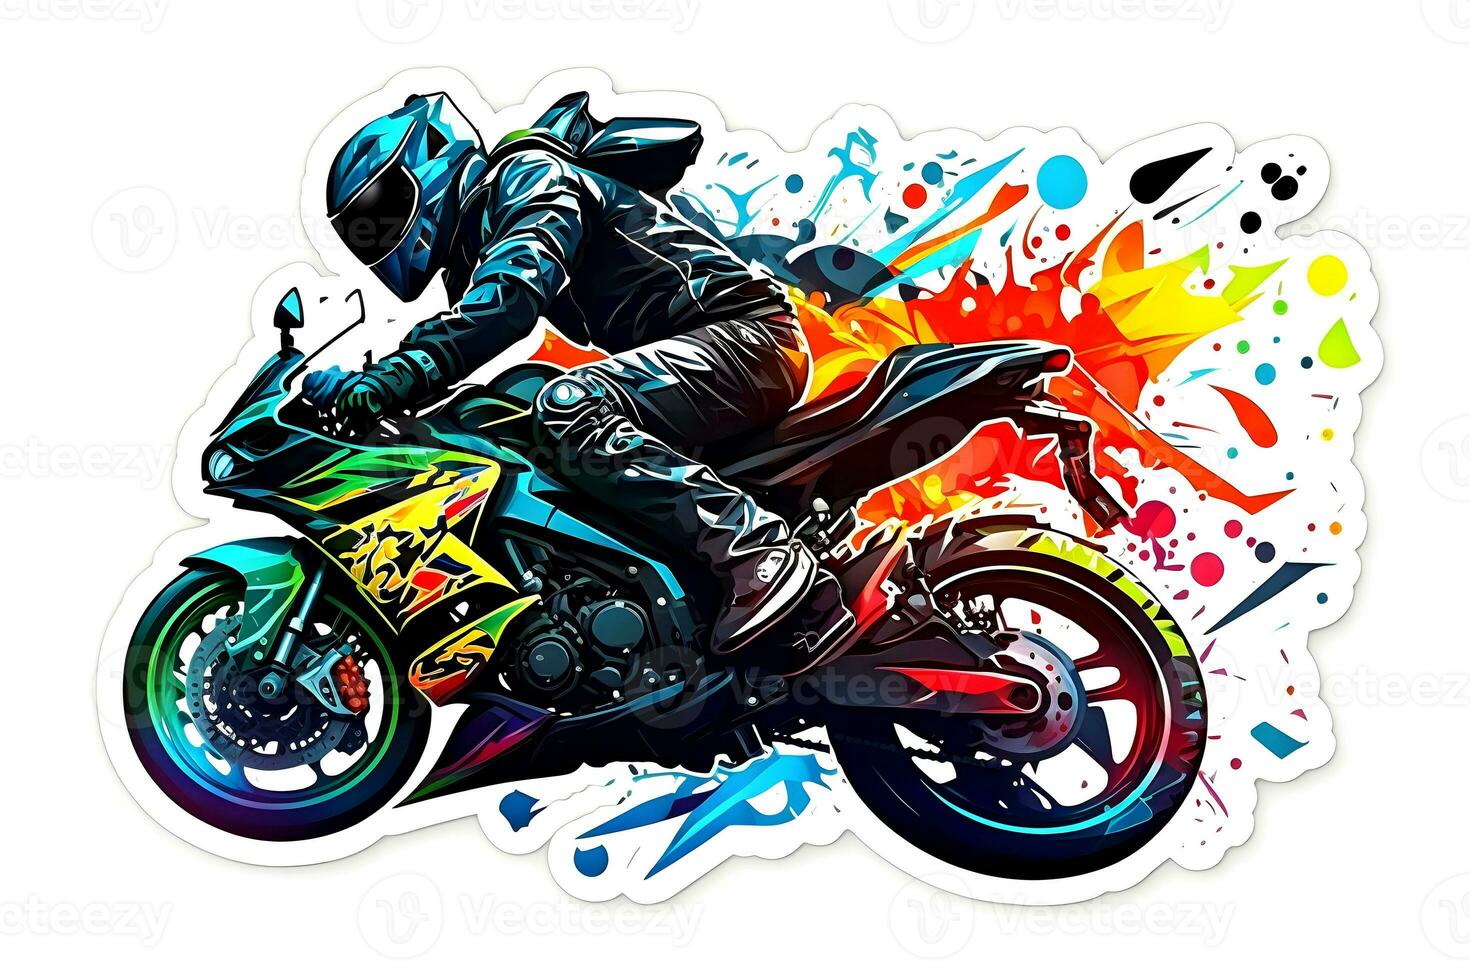 Sticker of Biker on sport motorcycle in watercolor style on white background. Neural network generated art photo